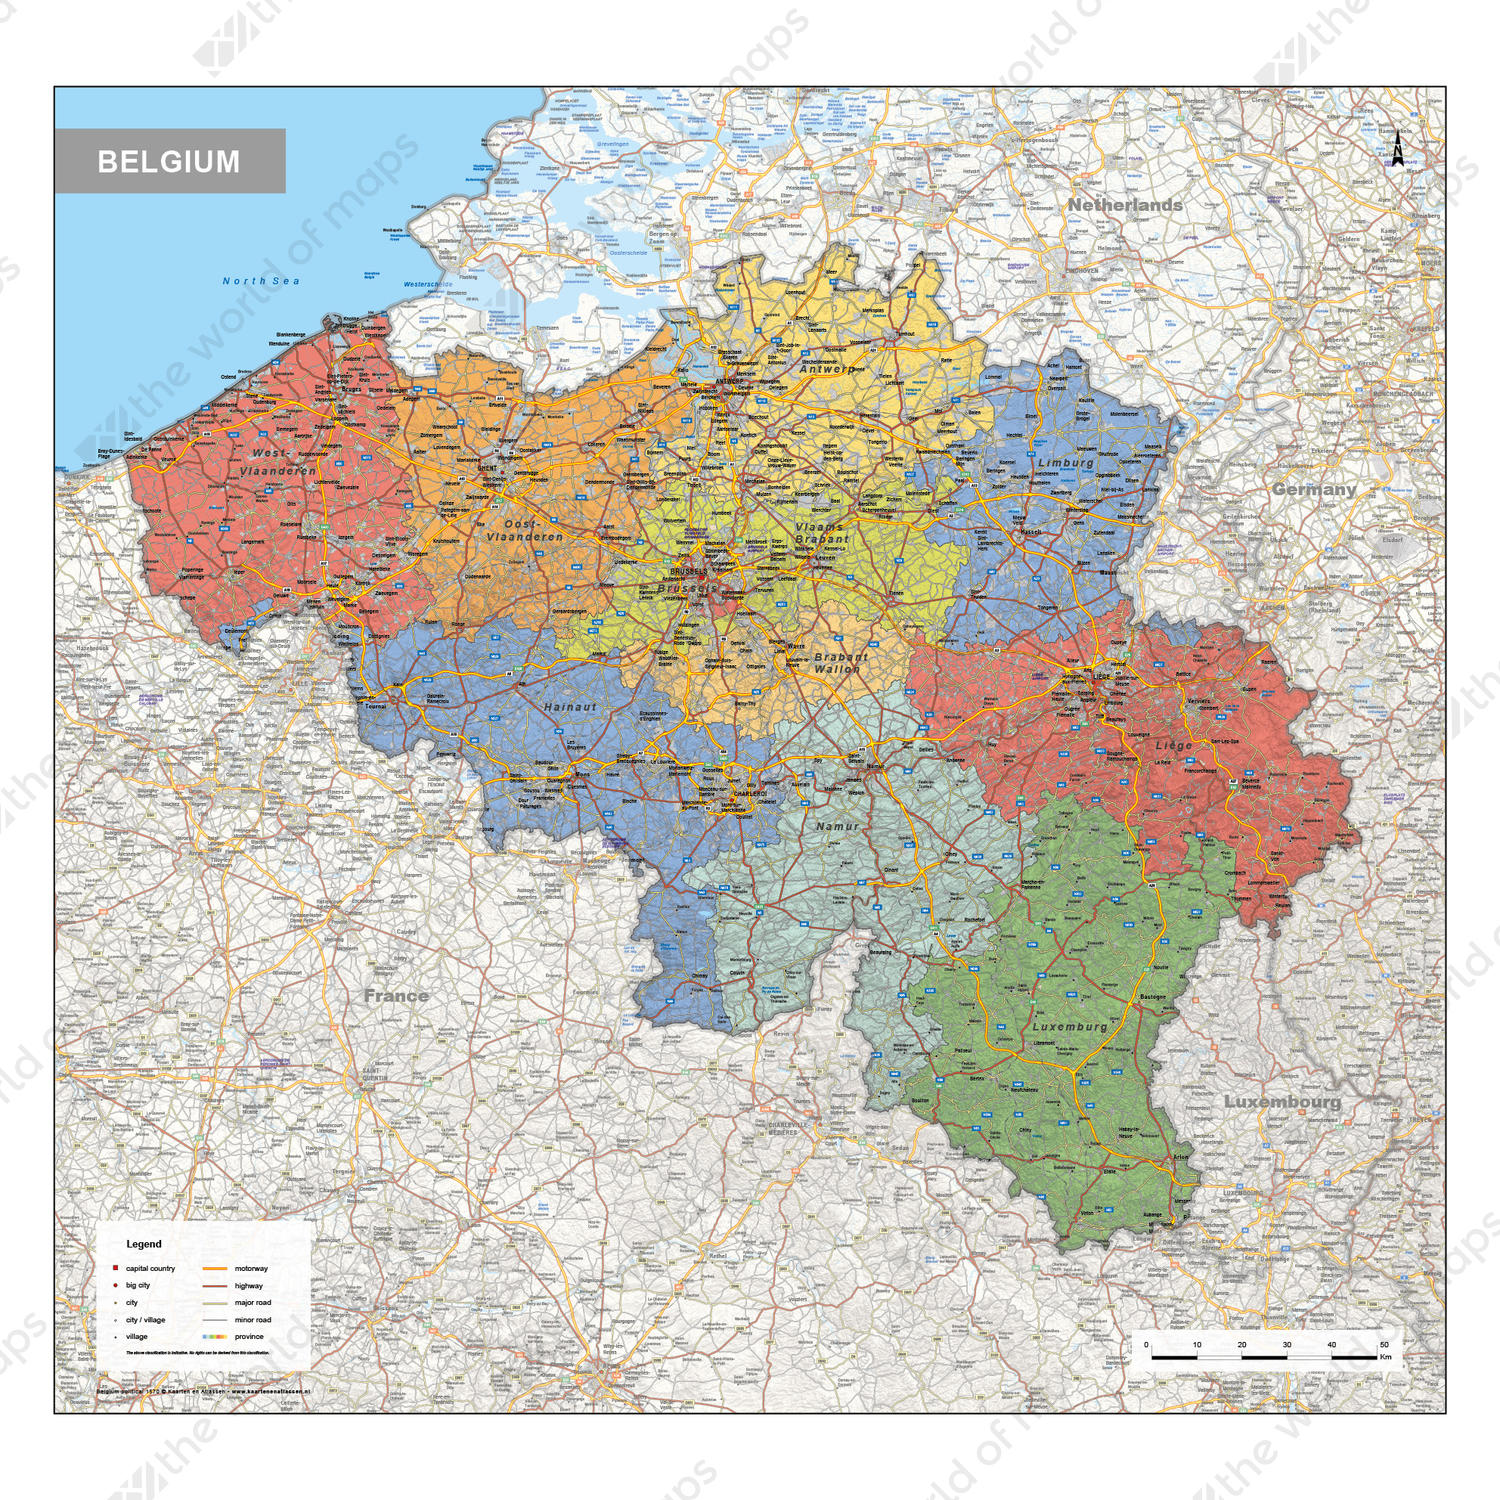 Belgium Facts Geography And History Britannica